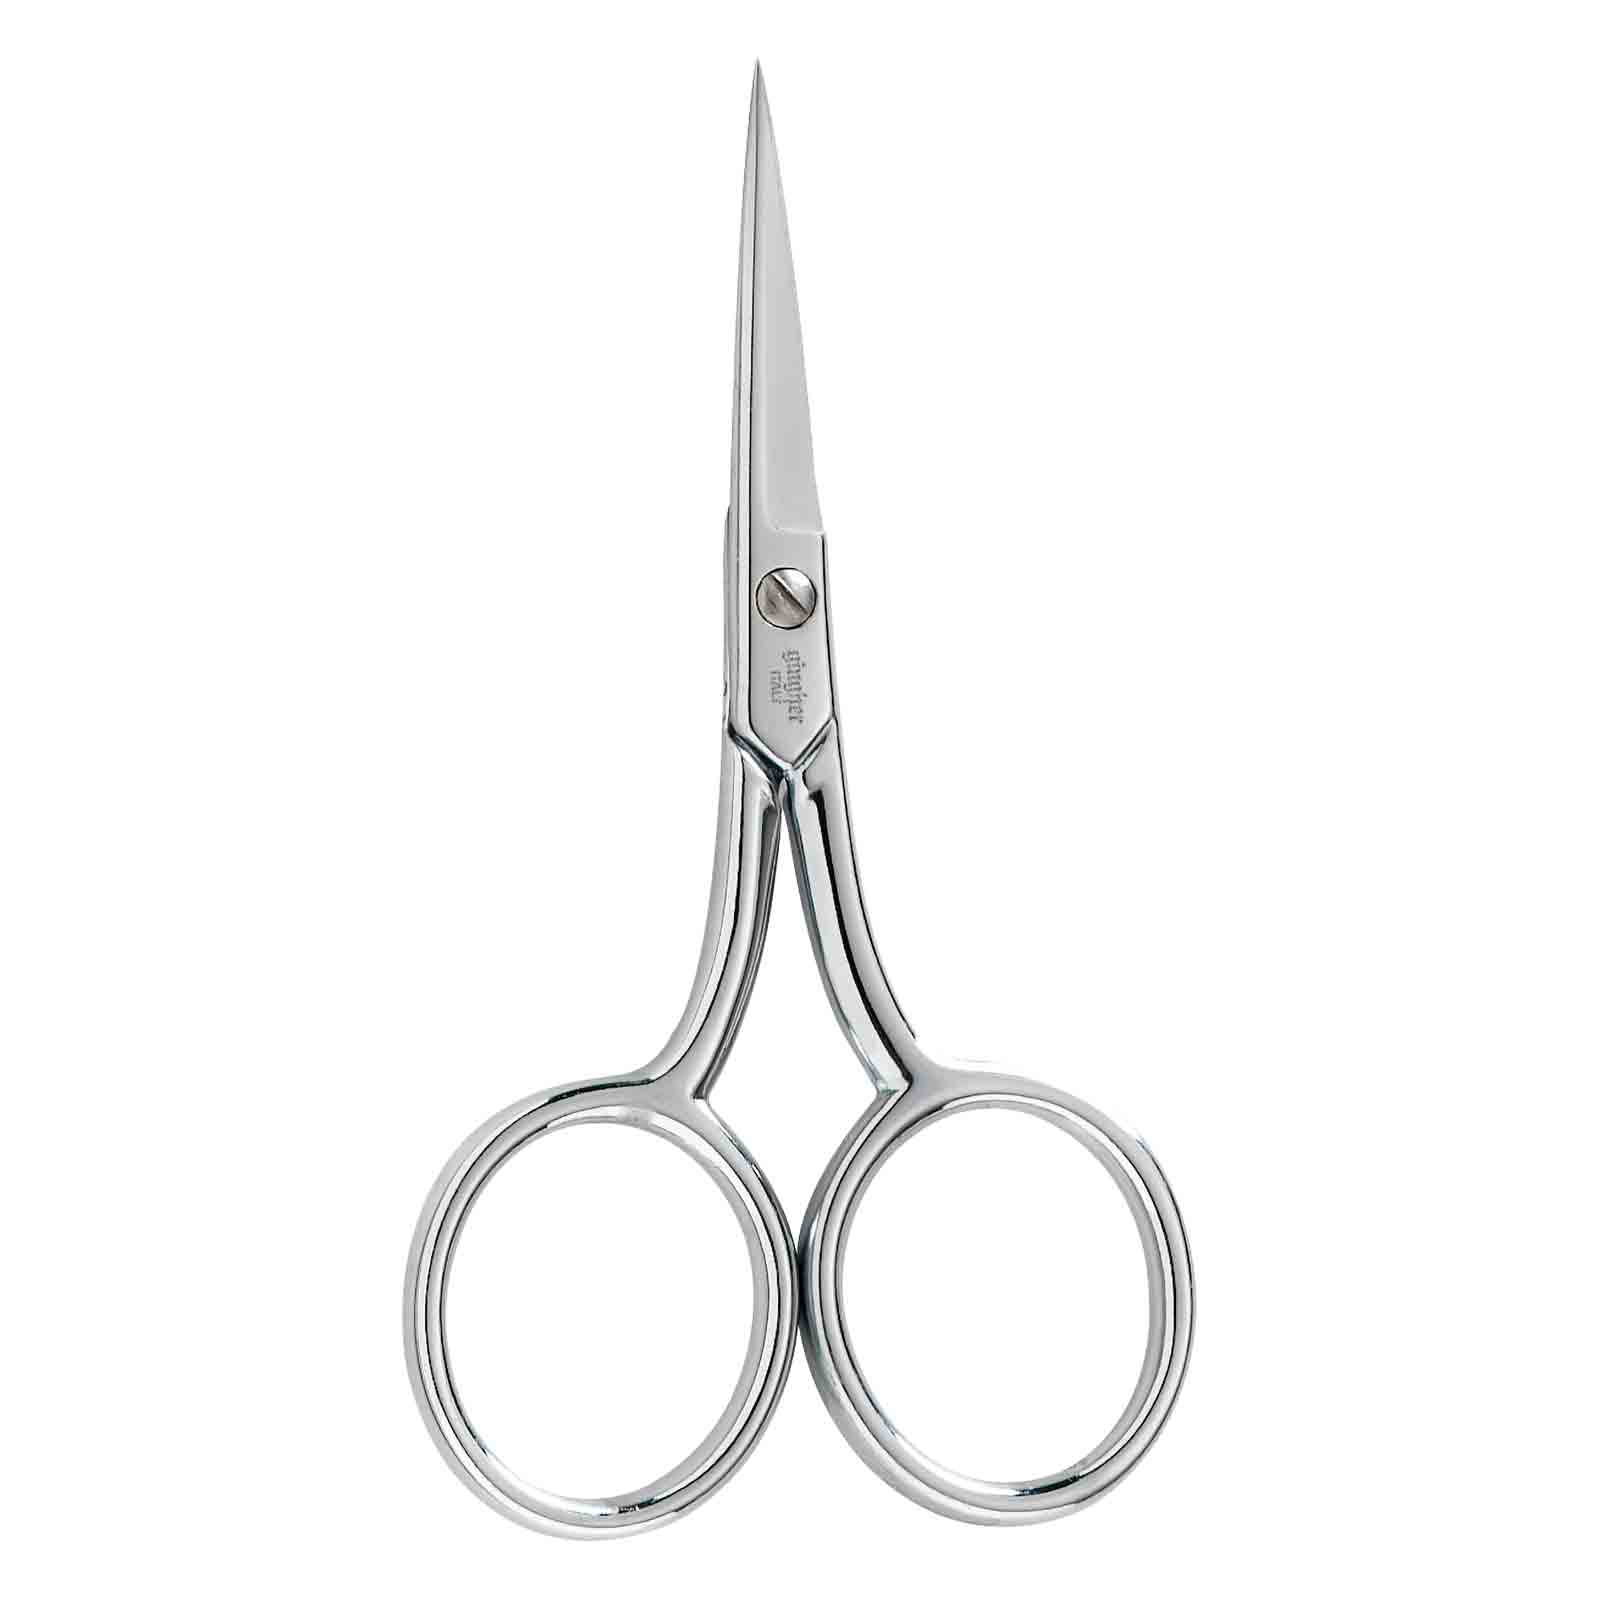 Gingher 220090 Forged 4 inch Large Handle Embroidery Scissors